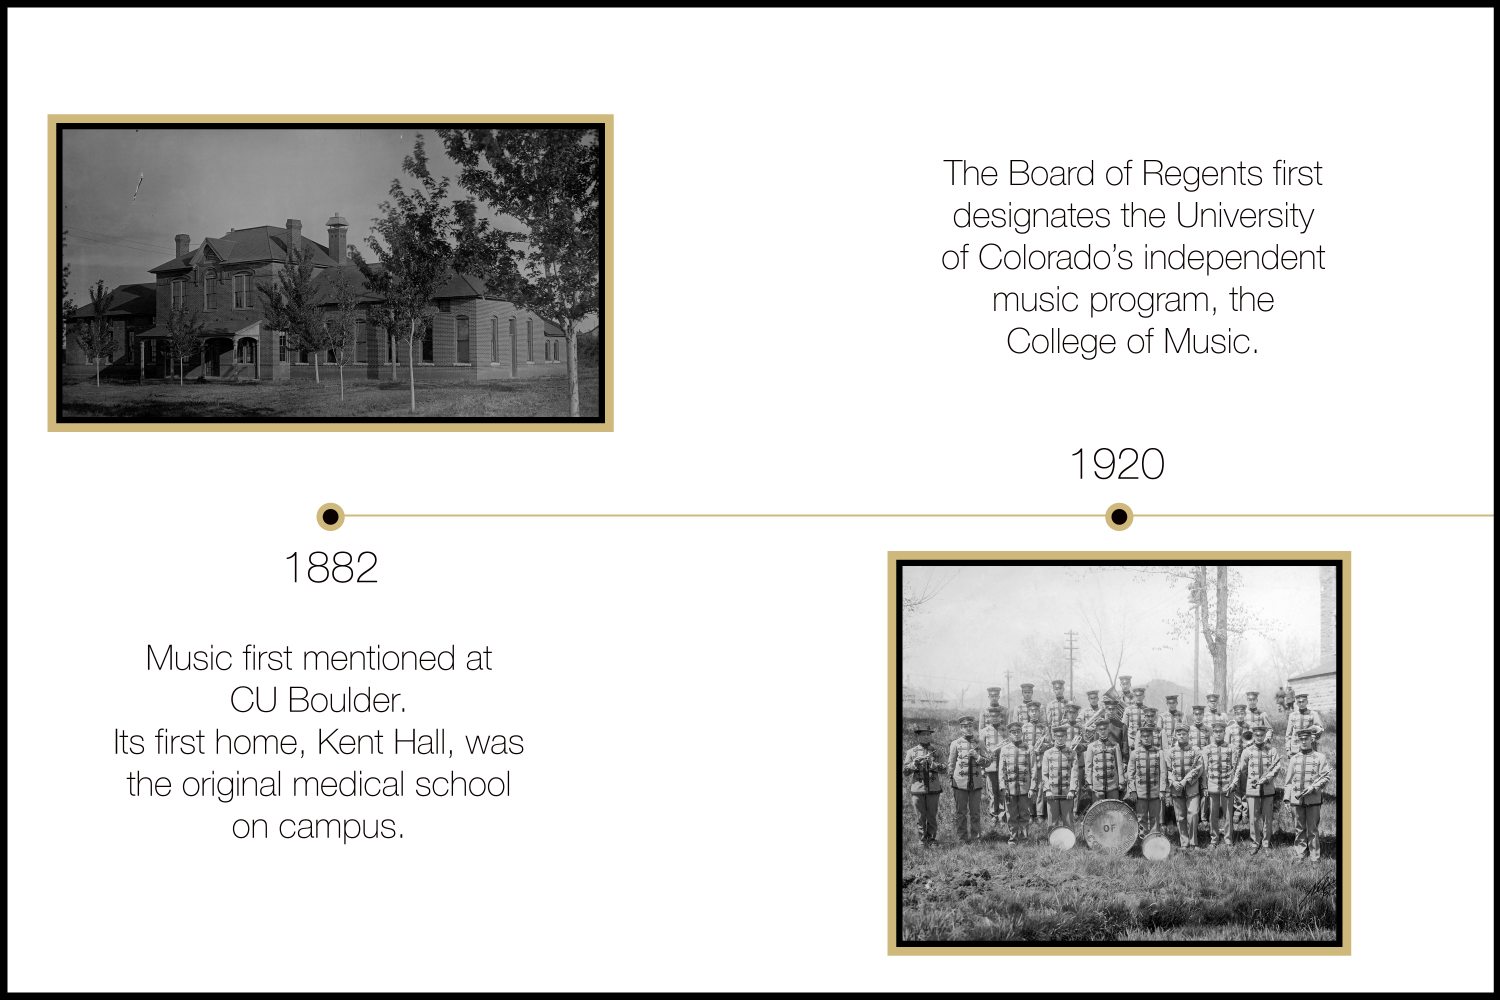 kent hall and the marching band: 1882-1920